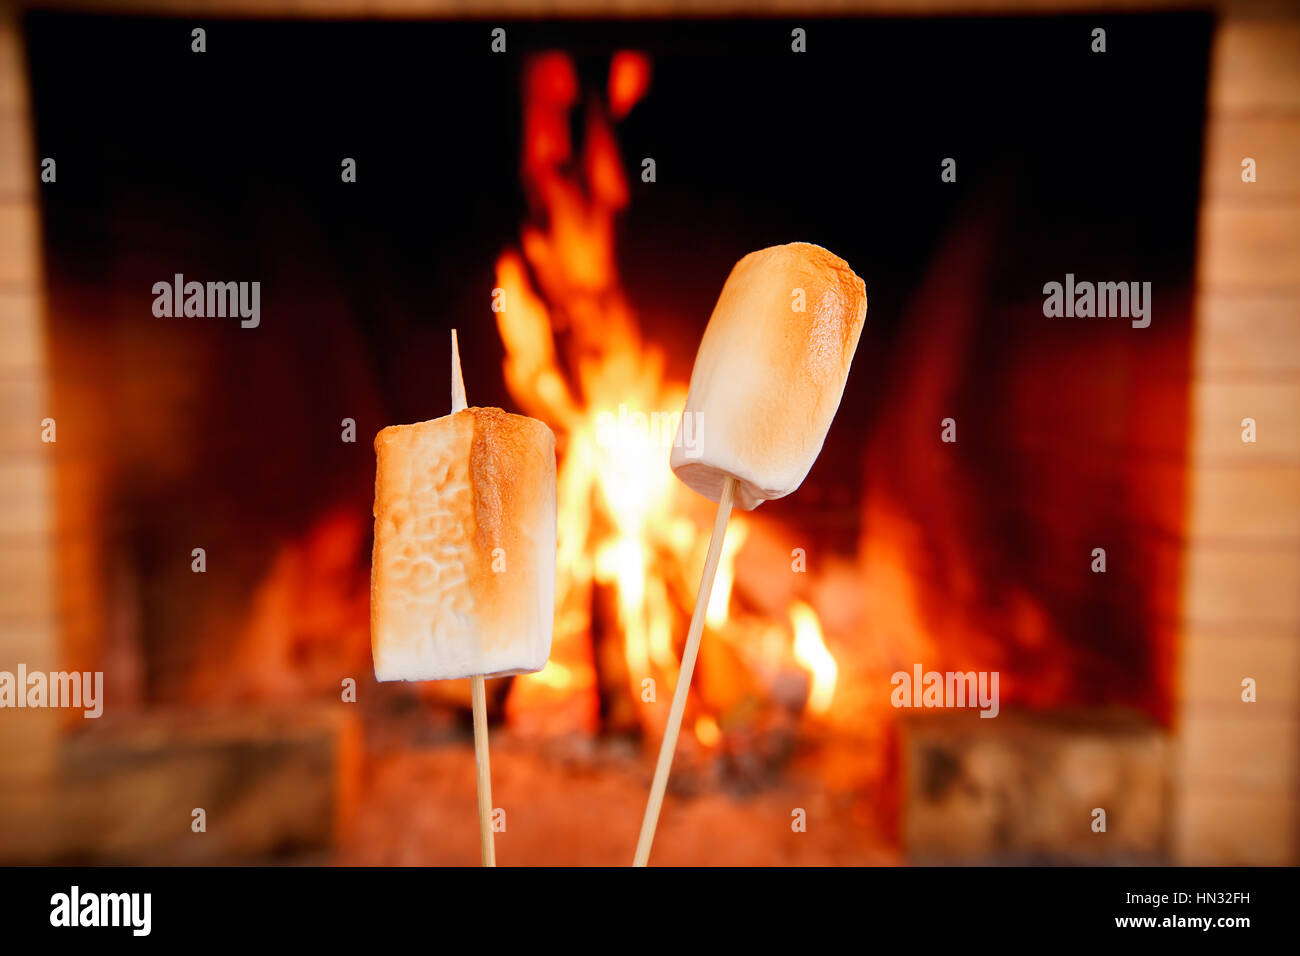 Two marshmallows on sticks being roasted by the fire Stock Photo